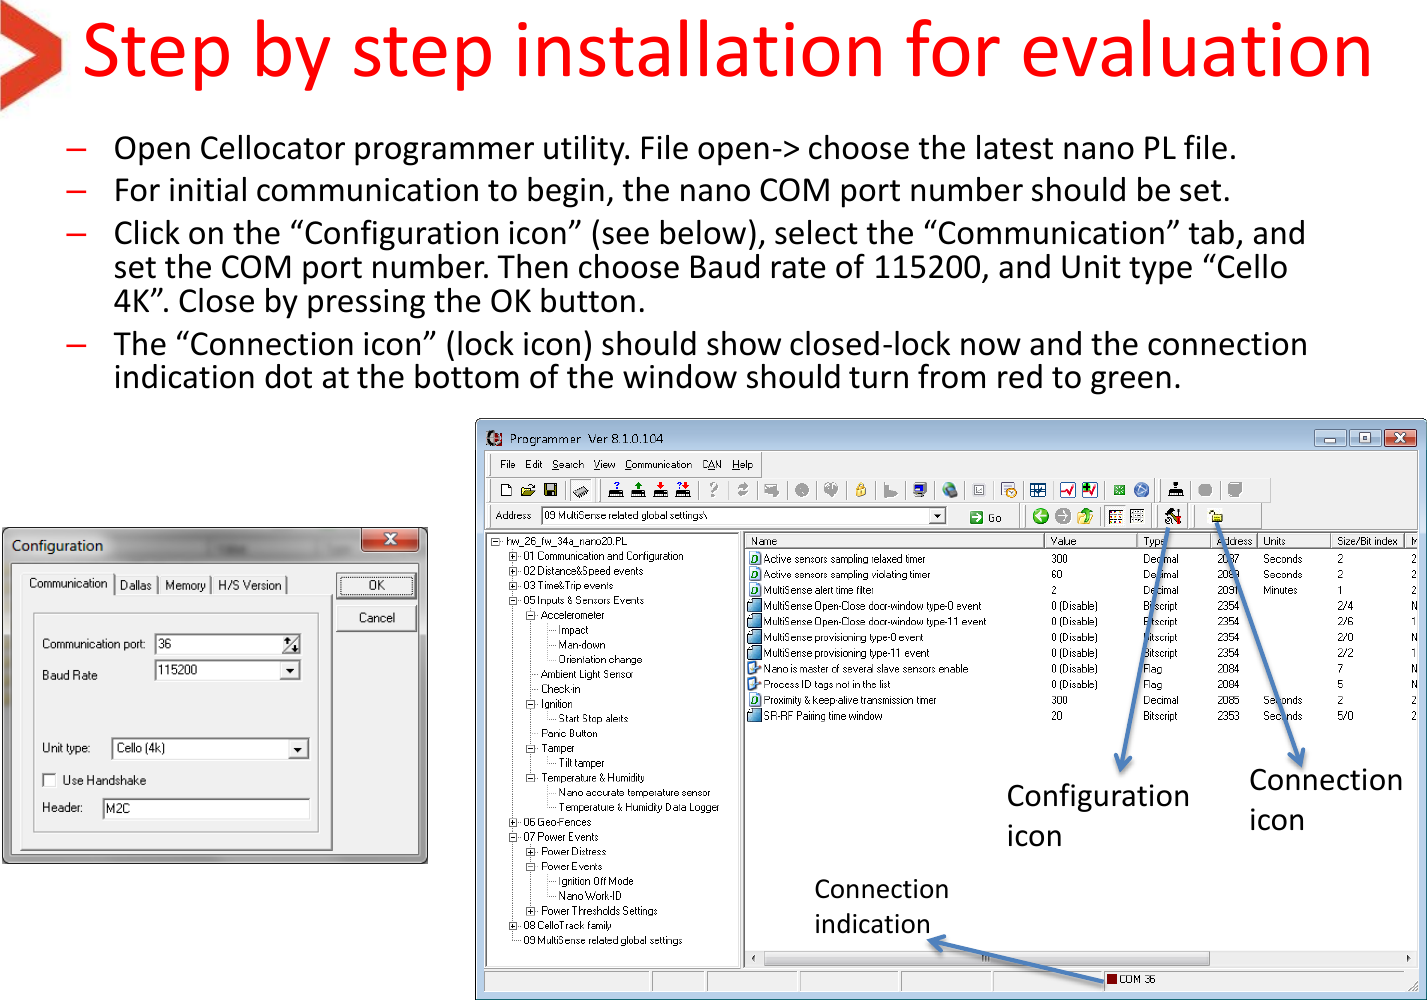 Step by step installation for evaluation –Open Cellocator programmer utility. File open-&gt; choose the latest nano PL file. –For initial communication to begin, the nano COM port number should be set. –Click on the “Configuration icon” (see below), select the “Communication” tab, and set the COM port number. Then choose Baud rate of 115200, and Unit type “Cello 4K”. Close by pressing the OK button. –The “Connection icon” (lock icon) should show closed-lock now and the connection indication dot at the bottom of the window should turn from red to green. Configuration icon Connection icon Connection indication 